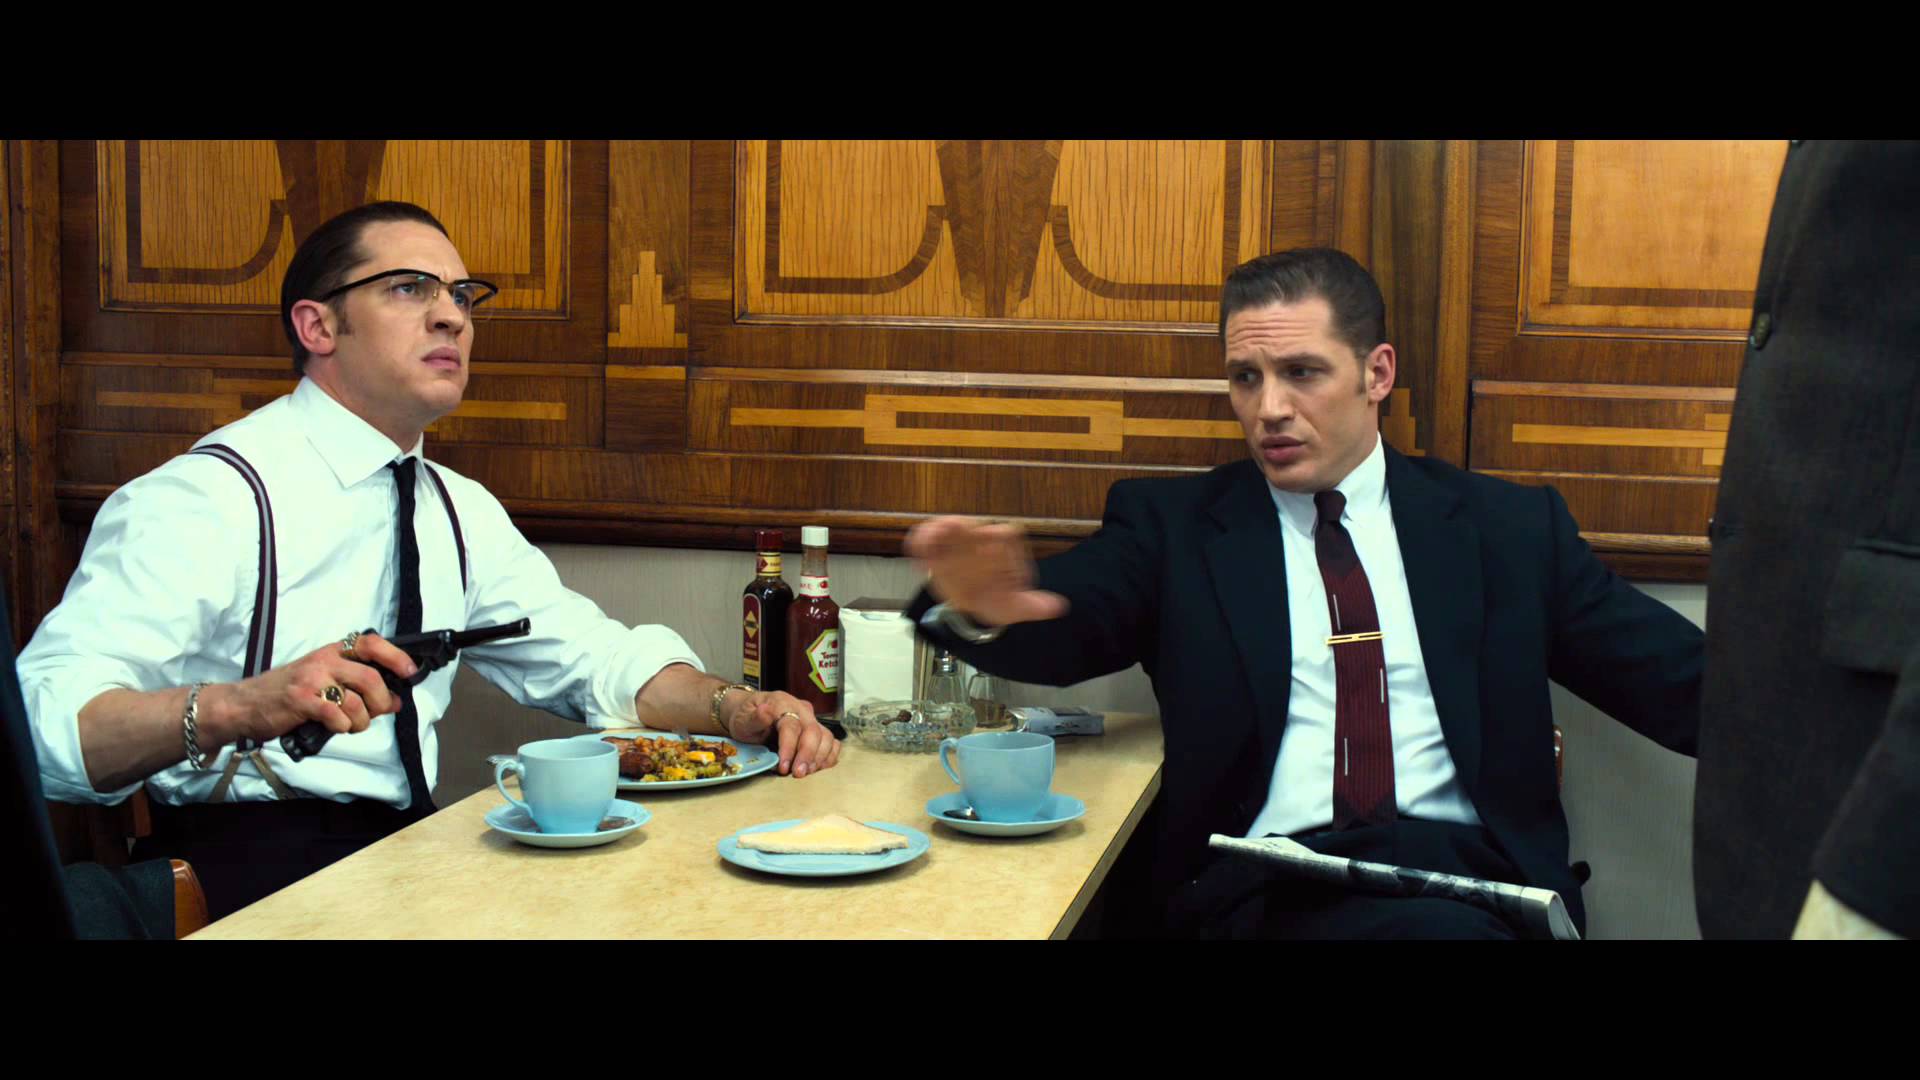 Tom Hardy thrills in brand new trailer for LEGEND! - FLAVOURMAG